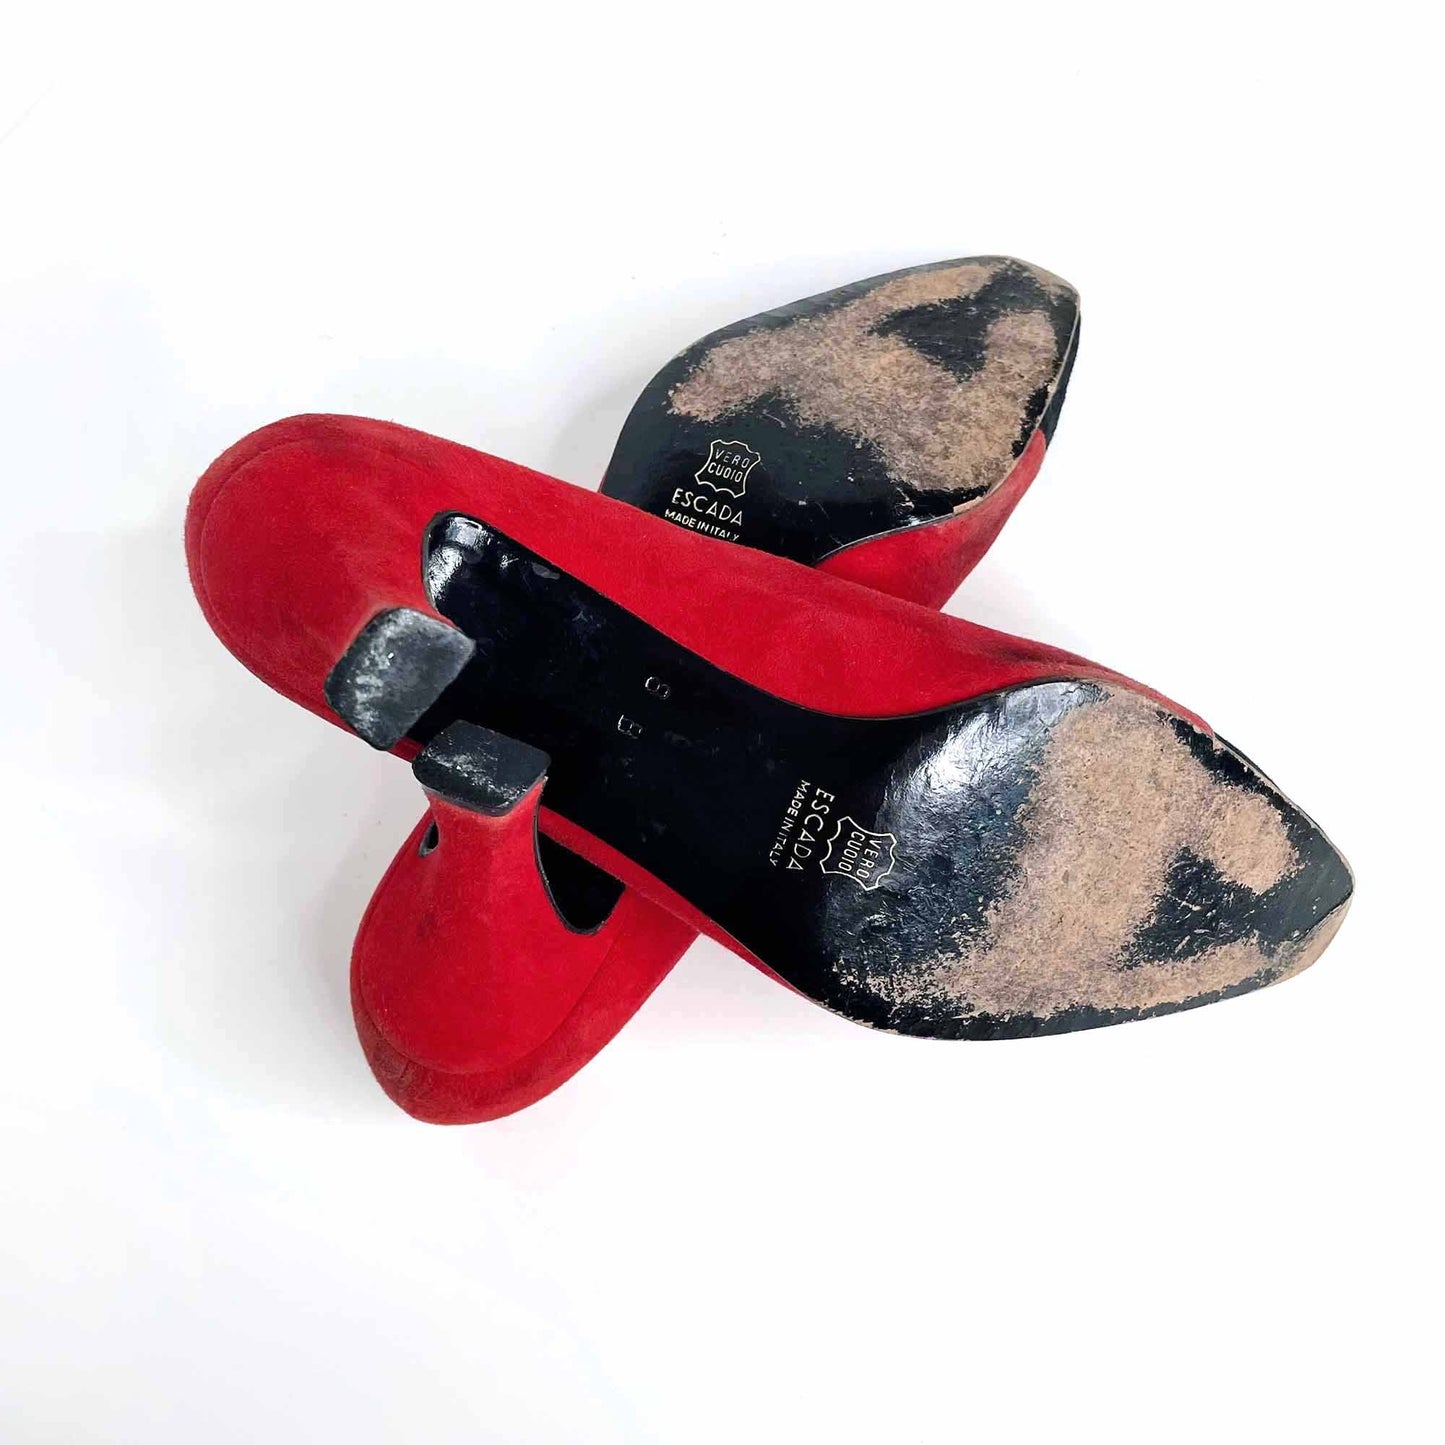 vintage escada red suede pumps with quilted black toe - size 8